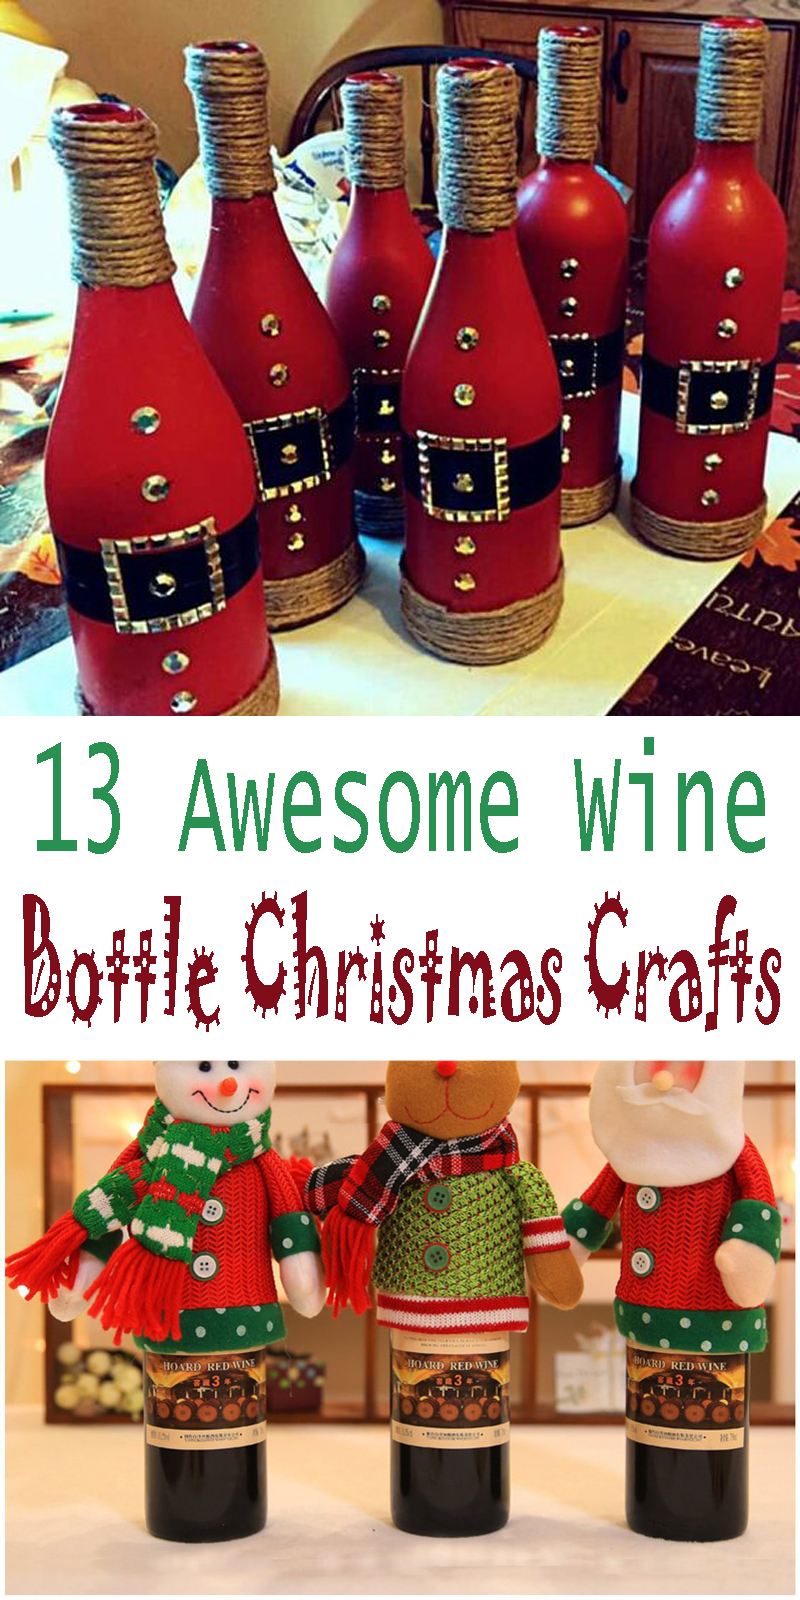 13 Awesome Wine Bottle Christmas Crafts - Holidays Blog For You